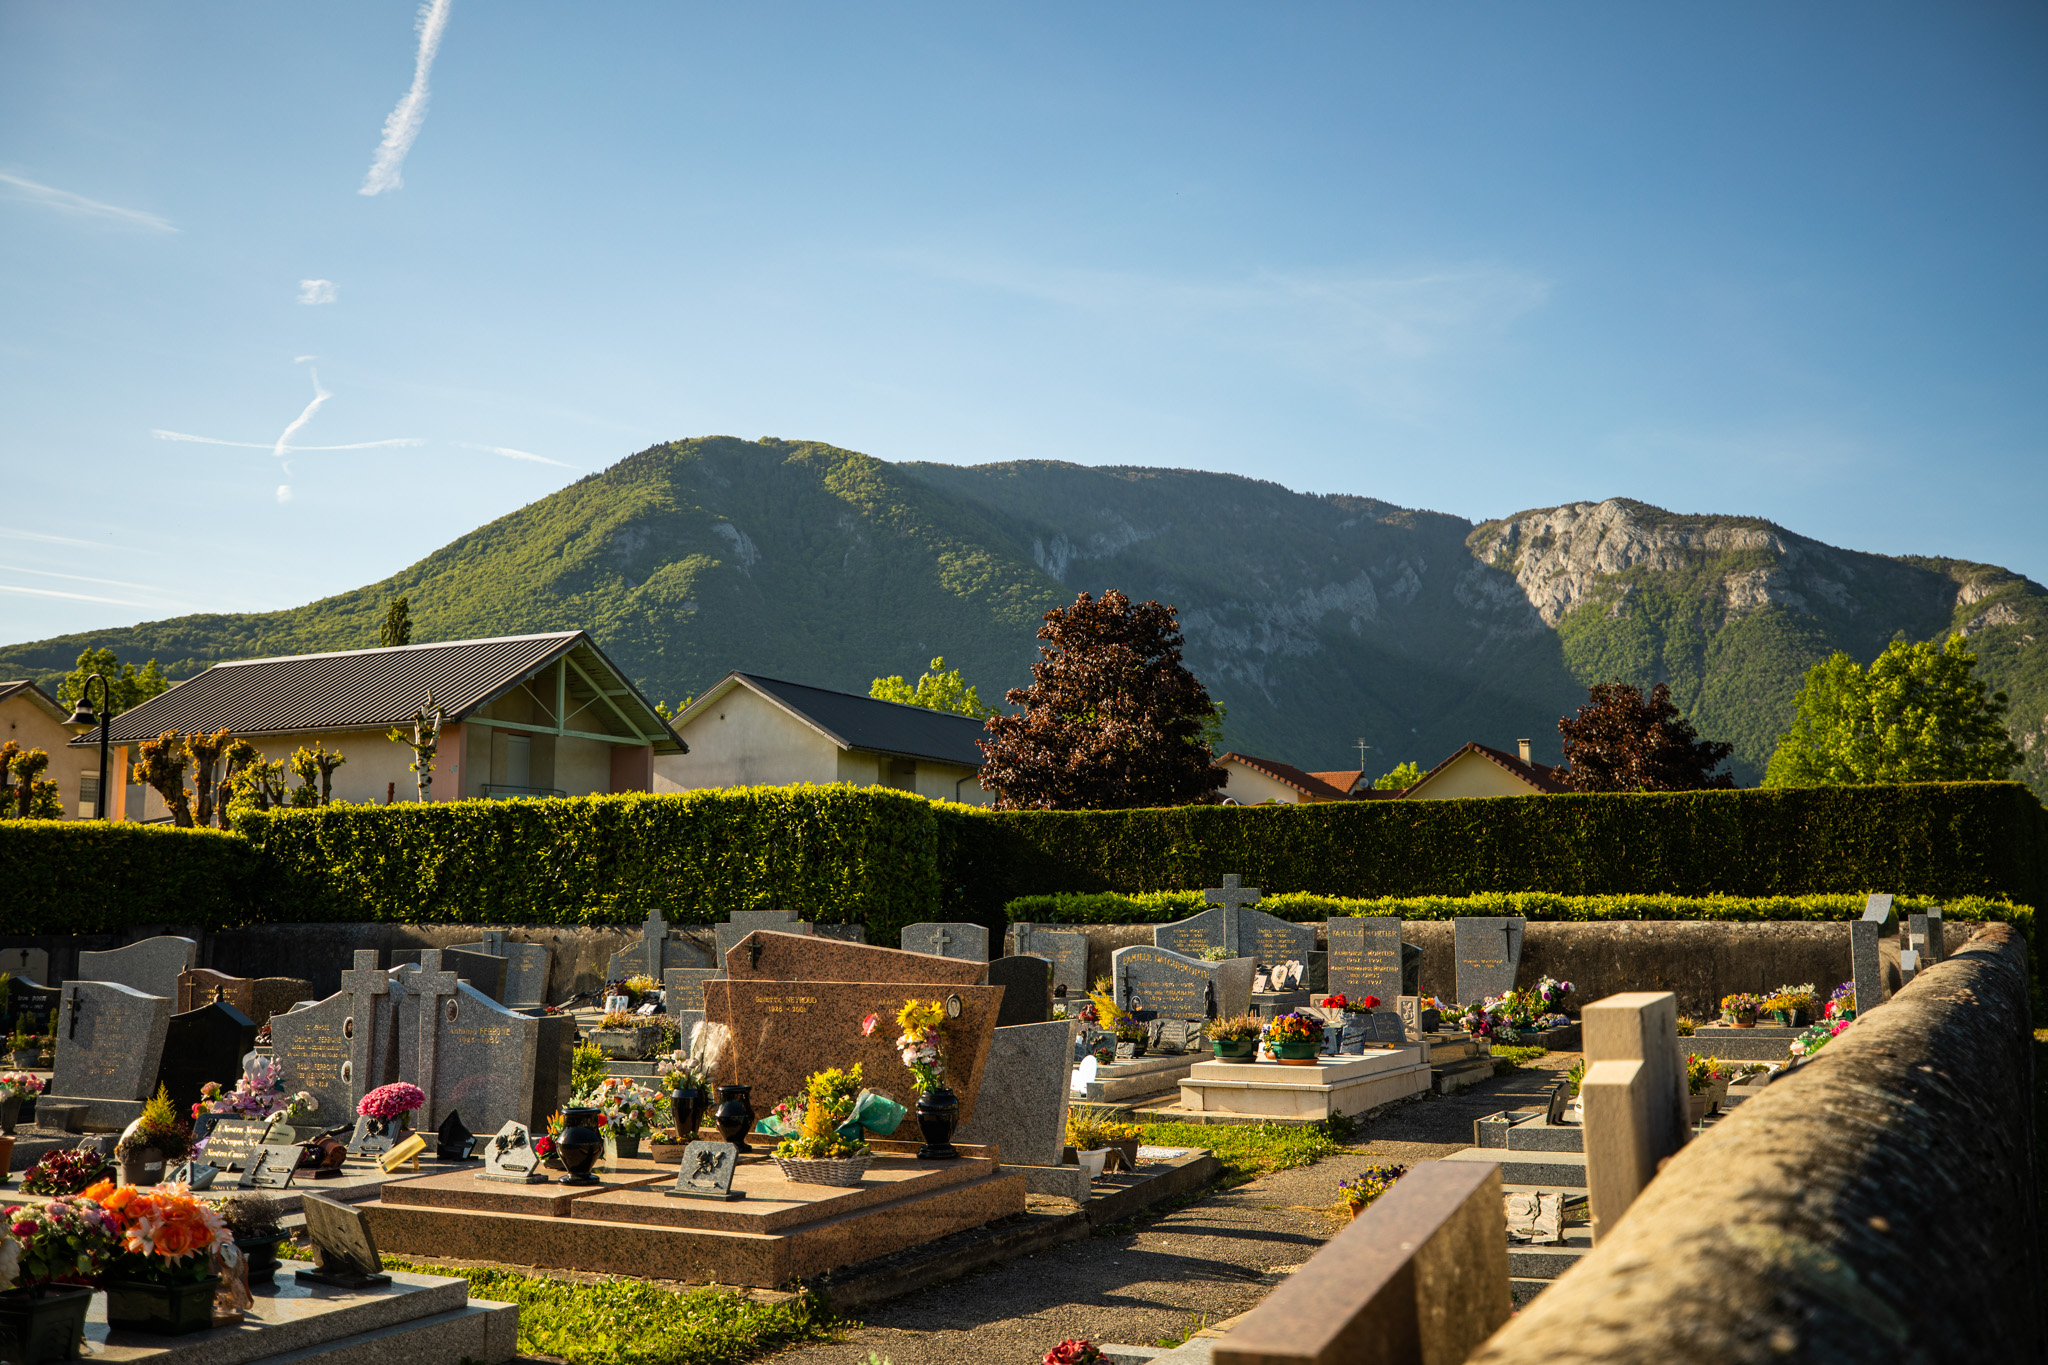 General 2048x1365 photography outdoors urban nature landscape mountains forest trees village building cemetery tombstones graveyards flowers grave